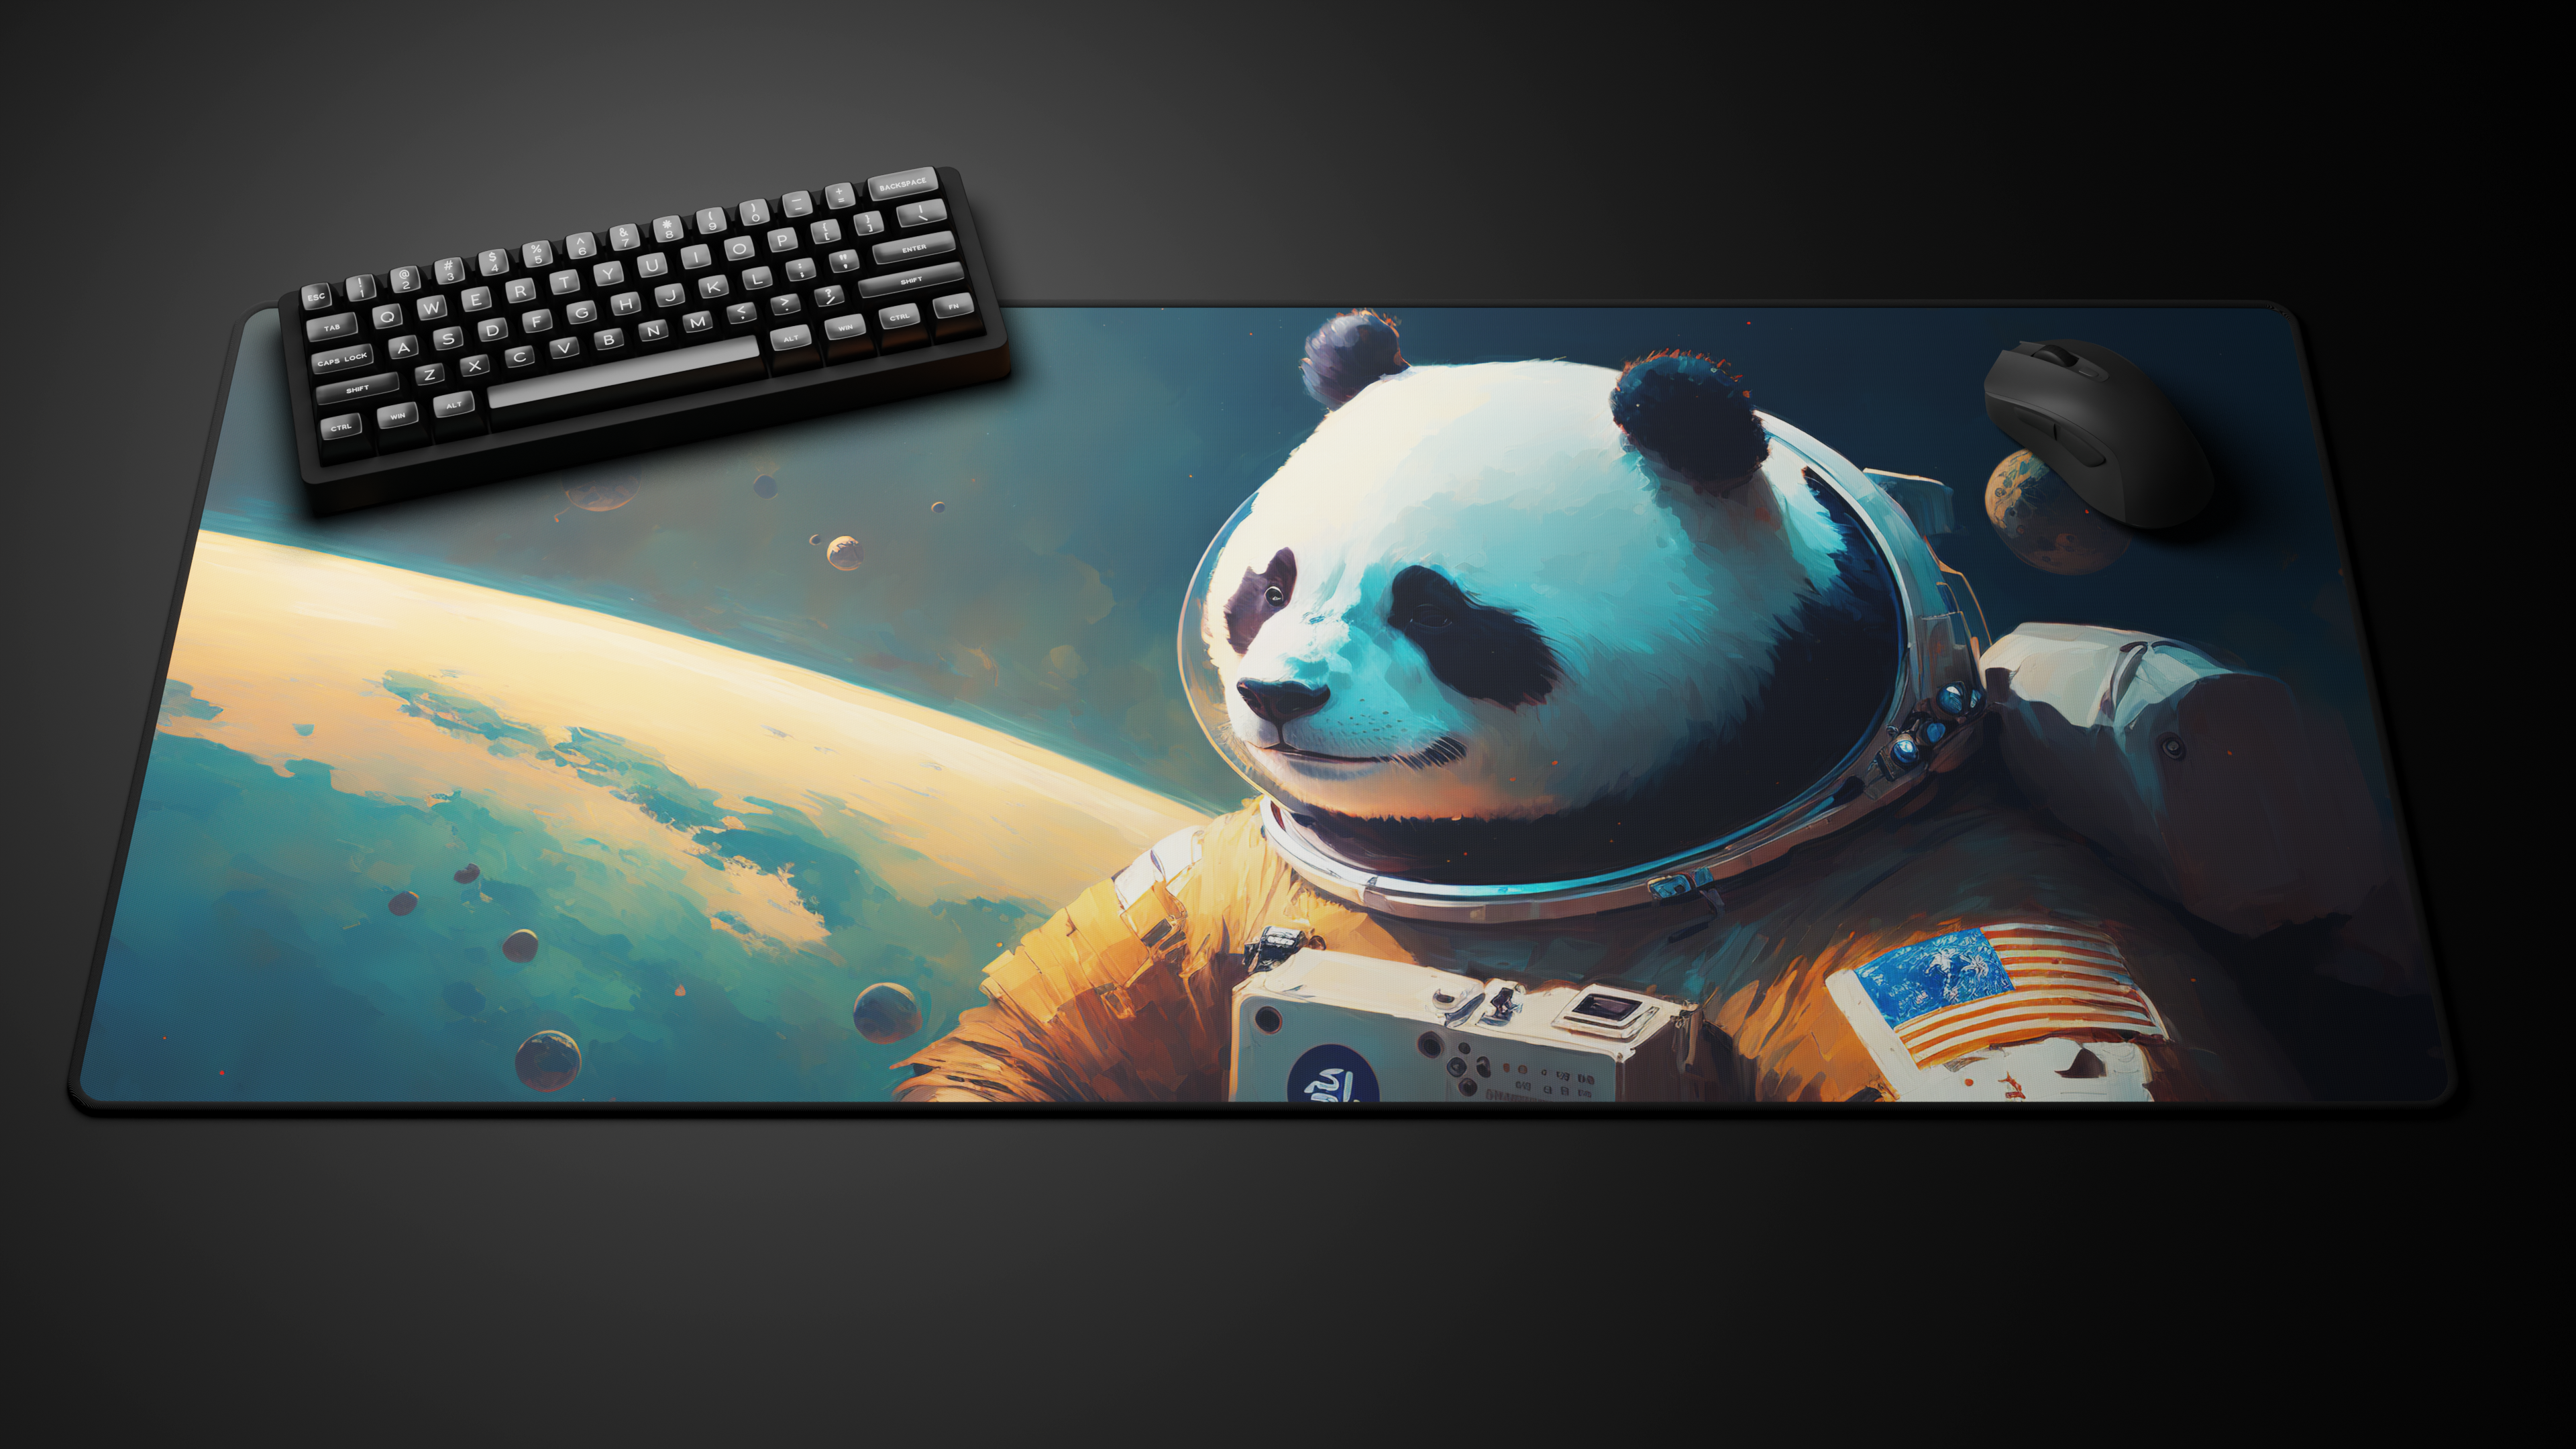 Deskmat 'Winter Collection - Space Panda' by glutch